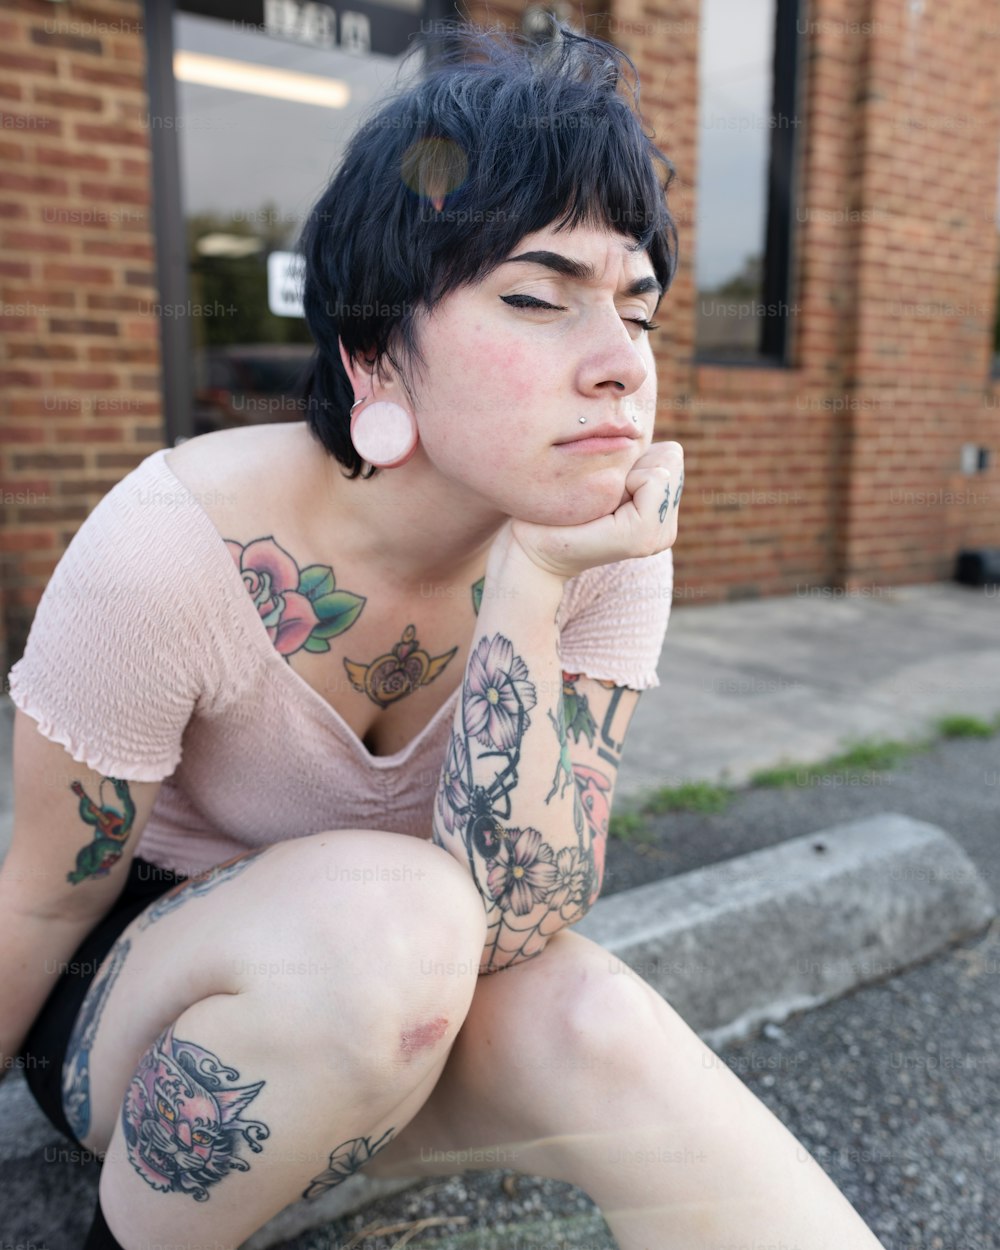 a woman with tattoos sitting on the ground